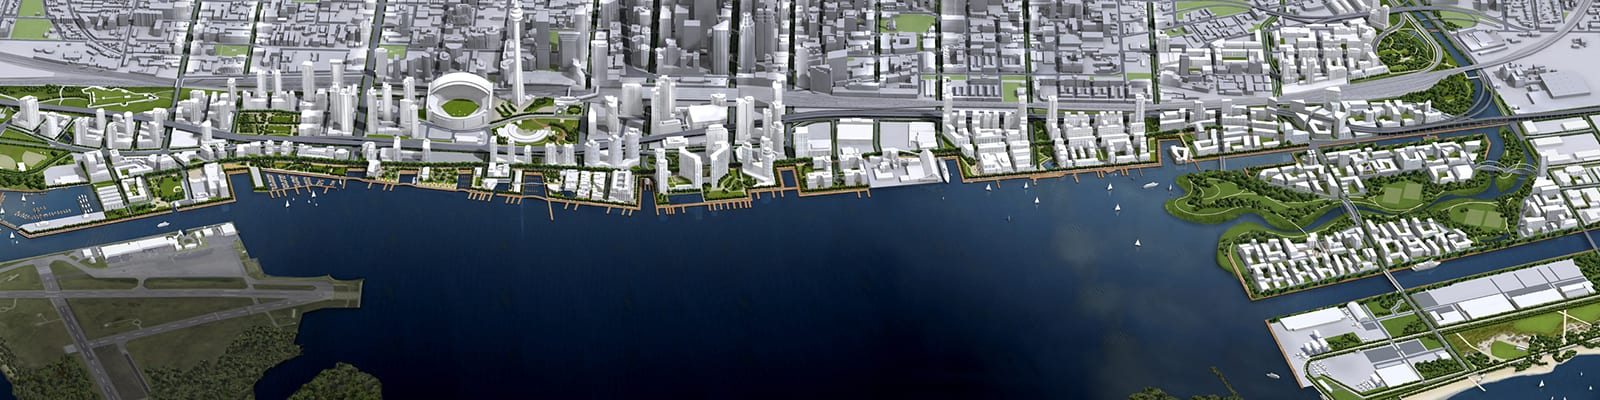 Rendering of Toronto's waterfront from an aerial view.